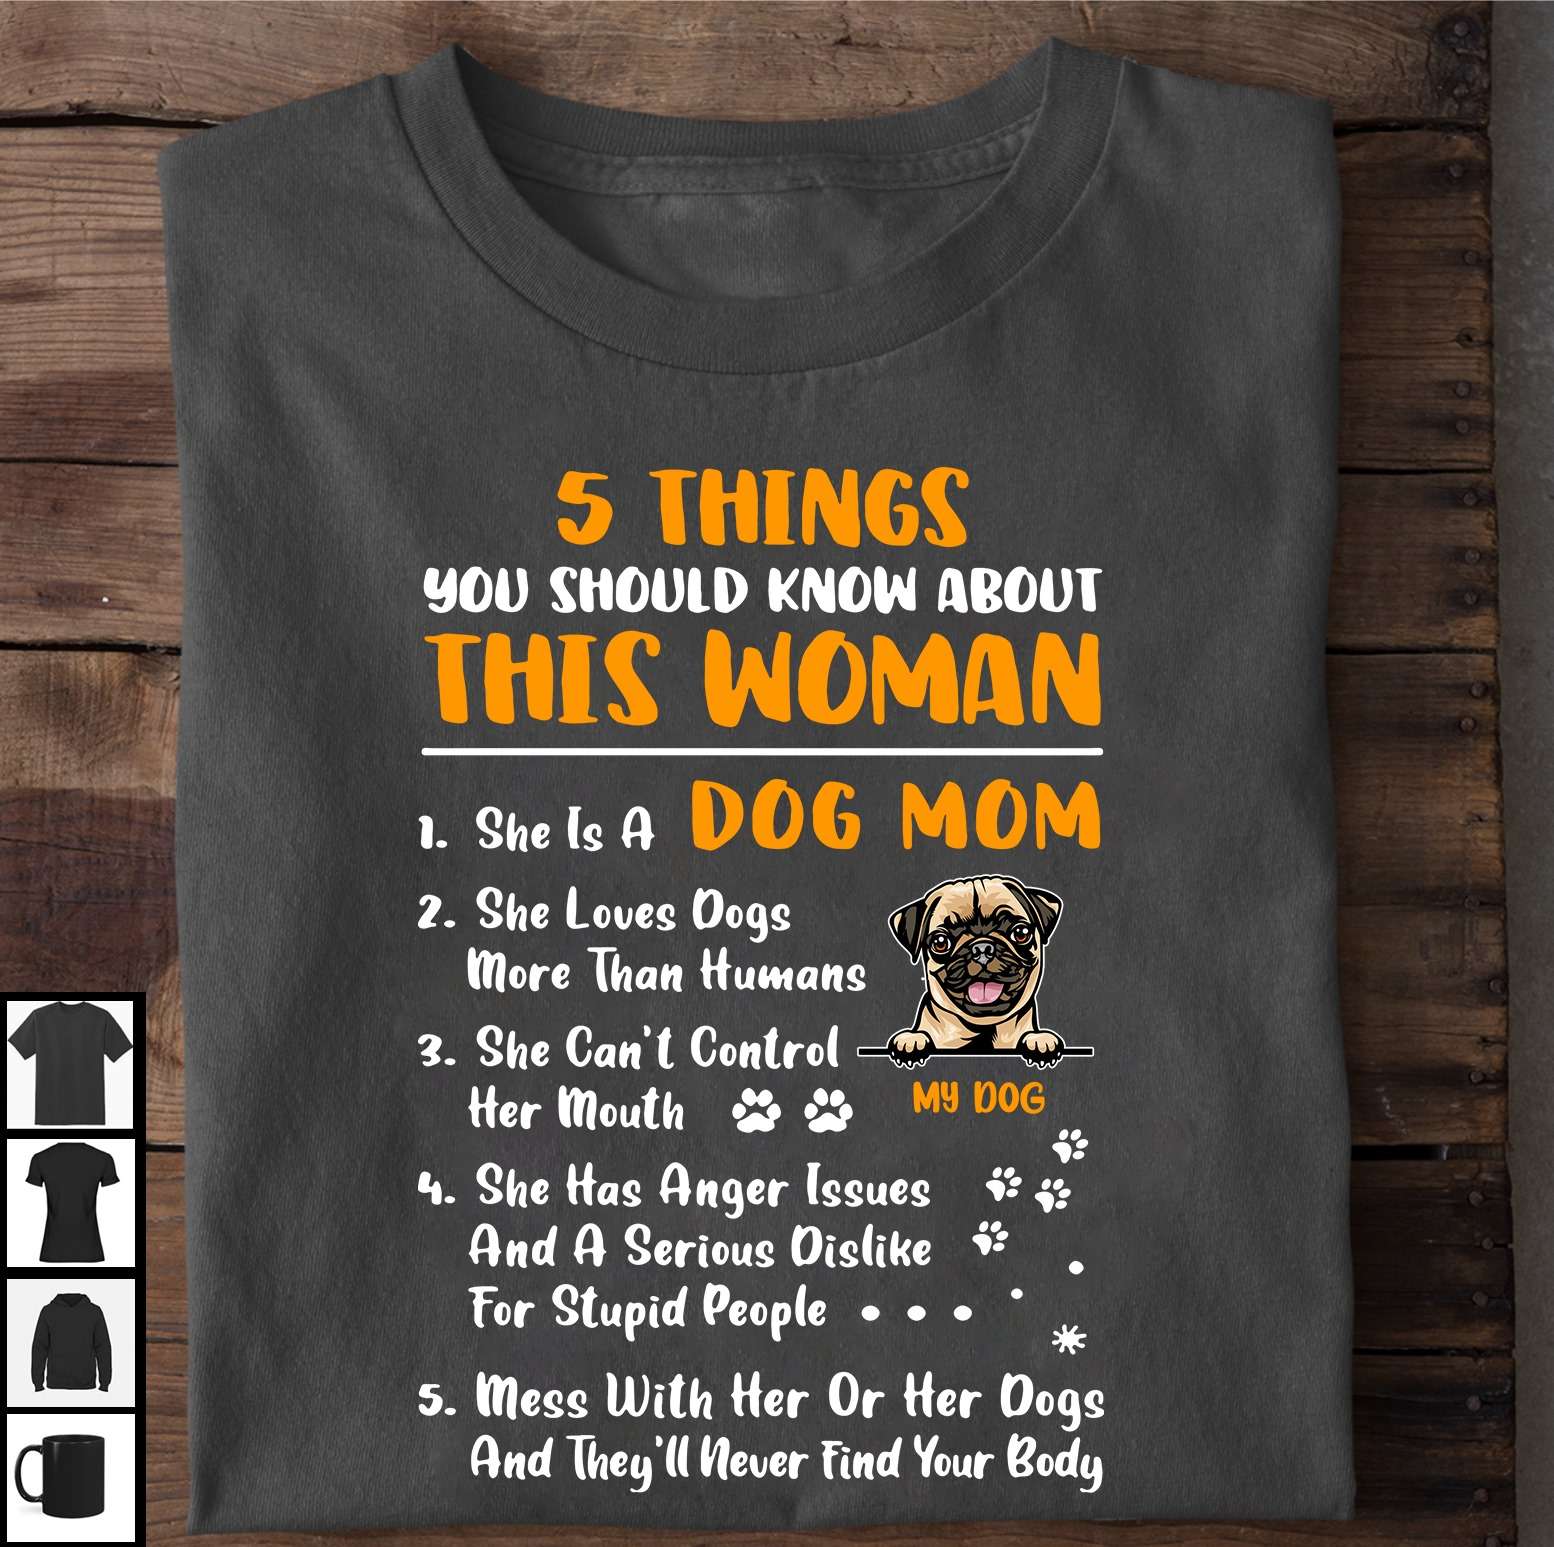 Dog mom gift - Pug dog's mother, has anger issues and a serious dislike for stupid people